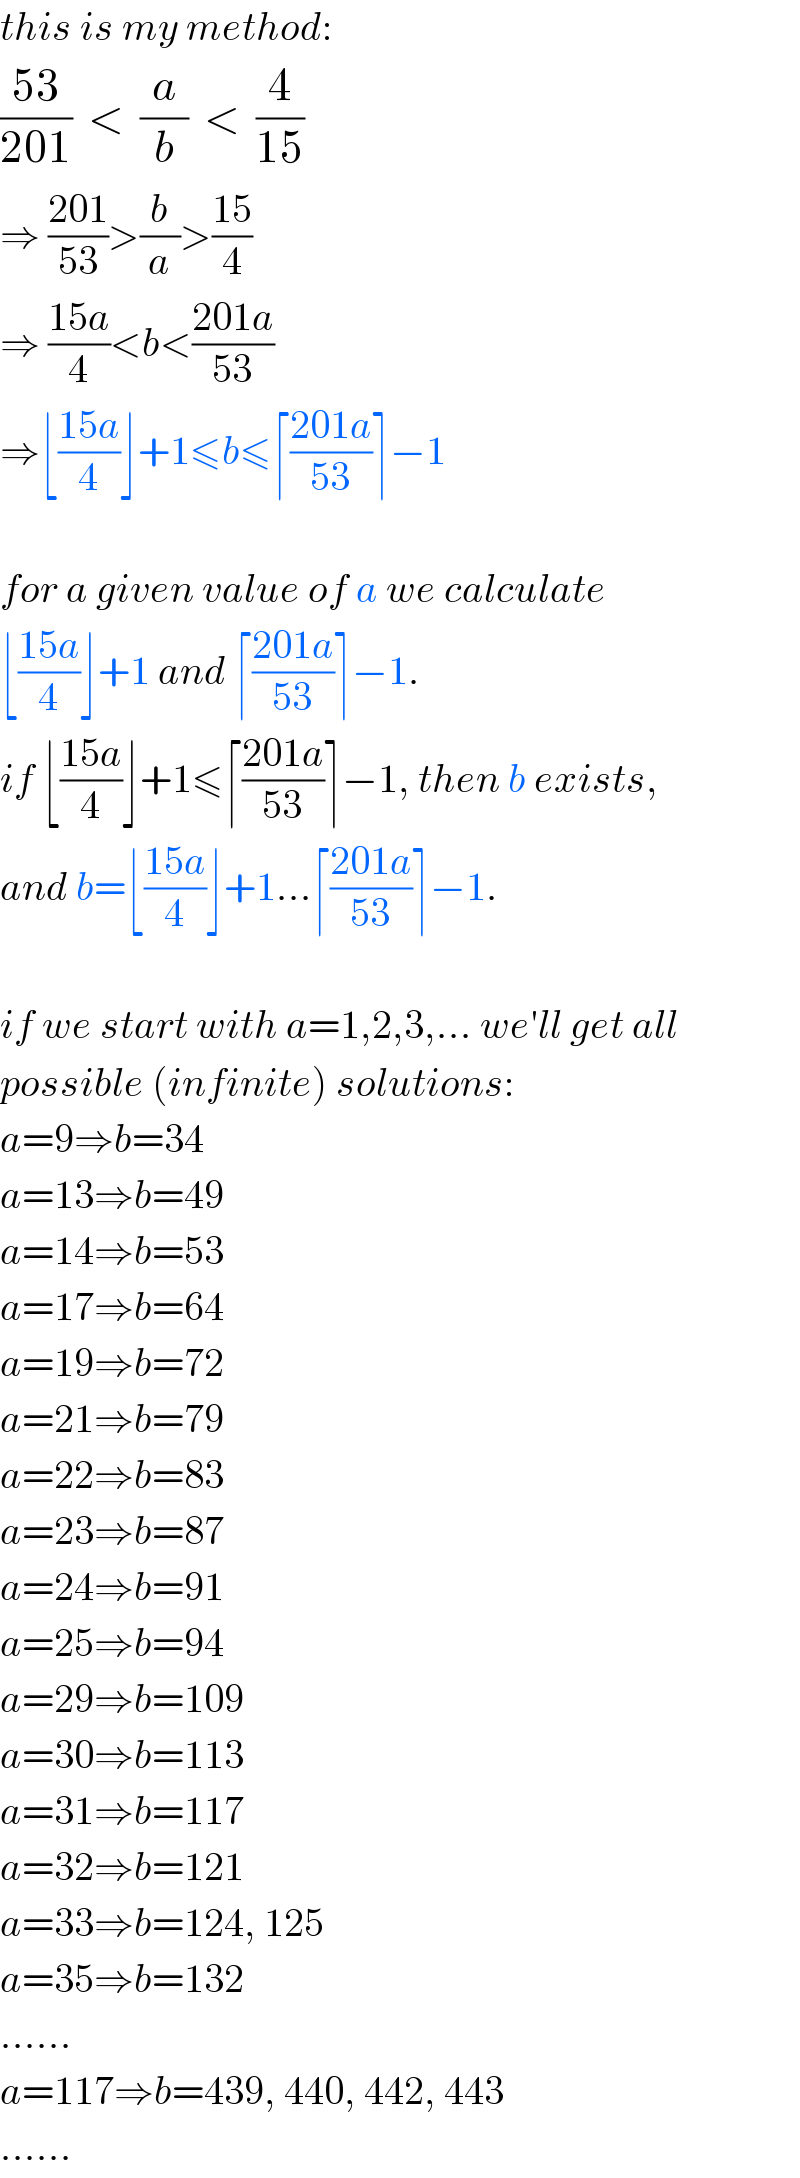 this is my method:  ((53)/(201))  <  (a/b)  <  (4/(15))  ⇒ ((201)/(53))>(b/a)>((15)/4)  ⇒ ((15a)/4)<b<((201a)/(53))  ⇒⌊((15a)/4)⌋+1≤b≤⌈((201a)/(53))⌉−1    for a given value of a we calculate  ⌊((15a)/4)⌋+1 and ⌈((201a)/(53))⌉−1.  if ⌊((15a)/4)⌋+1≤⌈((201a)/(53))⌉−1, then b exists,  and b=⌊((15a)/4)⌋+1...⌈((201a)/(53))⌉−1.    if we start with a=1,2,3,... we′ll get all  possible (infinite) solutions:  a=9⇒b=34  a=13⇒b=49  a=14⇒b=53  a=17⇒b=64  a=19⇒b=72  a=21⇒b=79  a=22⇒b=83  a=23⇒b=87  a=24⇒b=91  a=25⇒b=94  a=29⇒b=109  a=30⇒b=113  a=31⇒b=117  a=32⇒b=121  a=33⇒b=124, 125  a=35⇒b=132  ......  a=117⇒b=439, 440, 442, 443  ......  